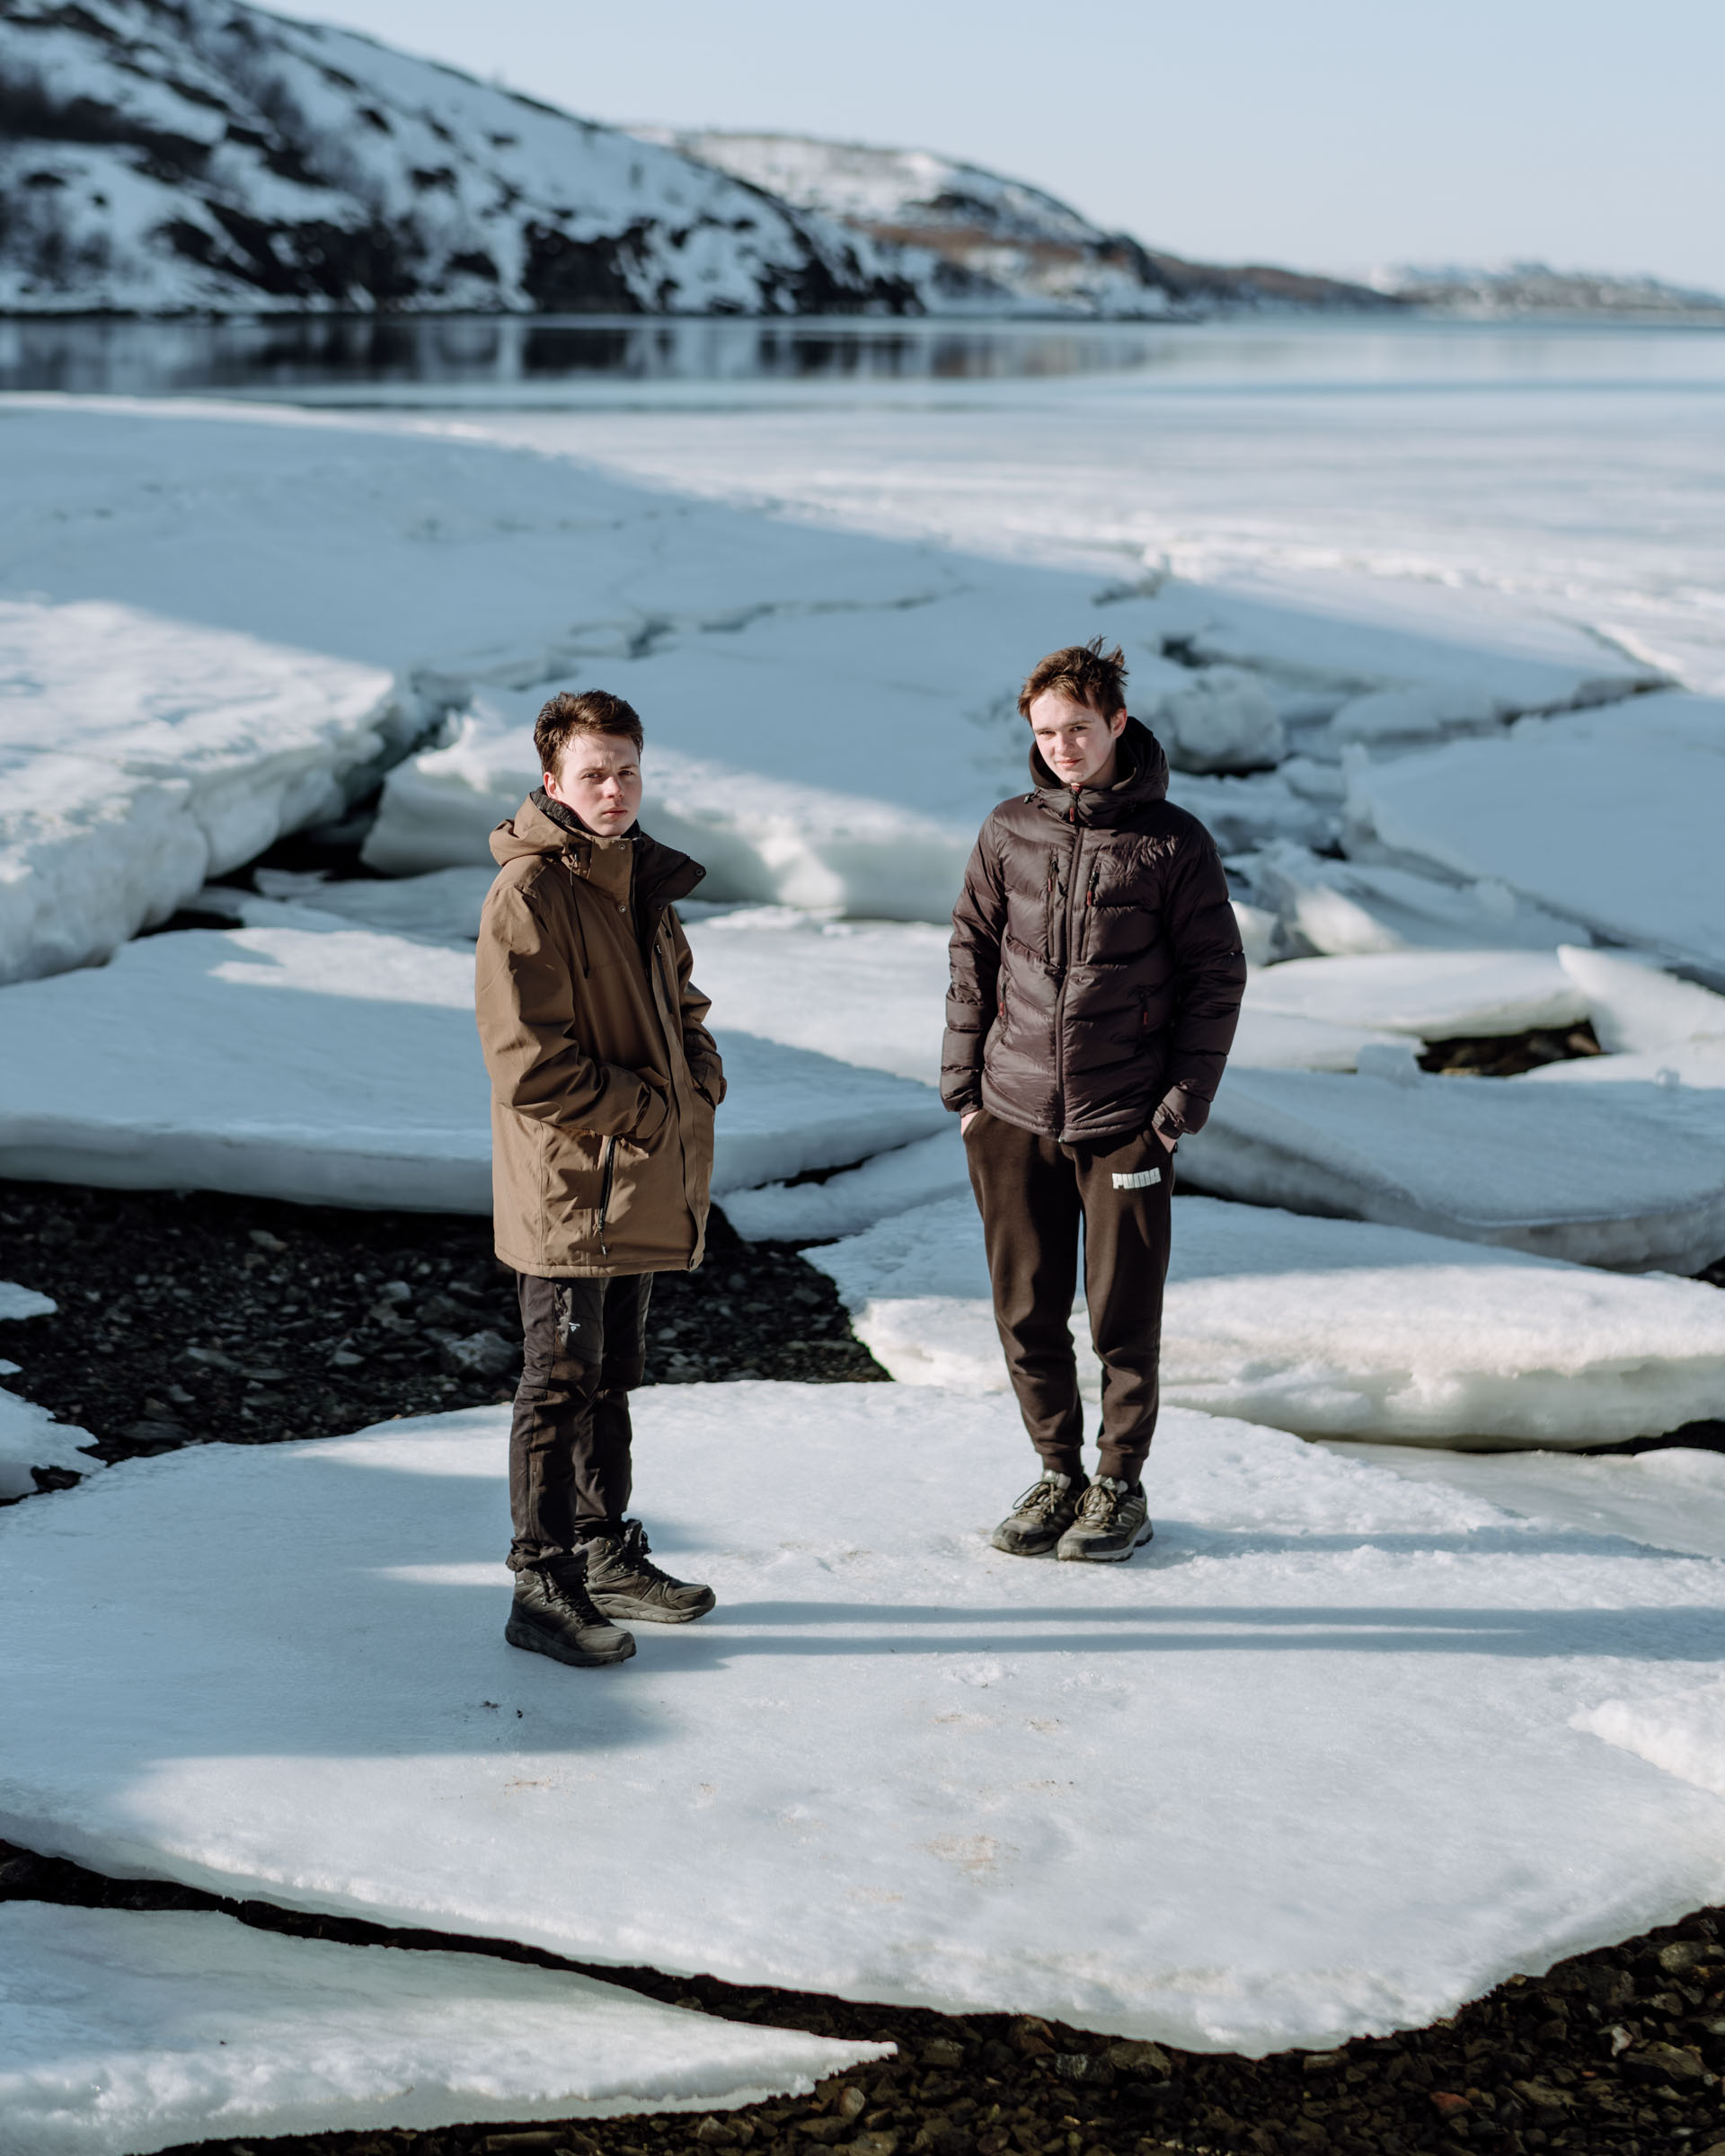 Sasha Buluiev, 20, and Yuri London, 18, stand on ice patches near Kirkenes where they are taking Norwegian lessons in school and looking for work. Both of their fathers are currently serving in the Ukrainian military. Yuri keeps in touch with his father daily on messaging apps. "I didn't hear from him for like 24 hours before...and I was losing my fucking mind," he said.